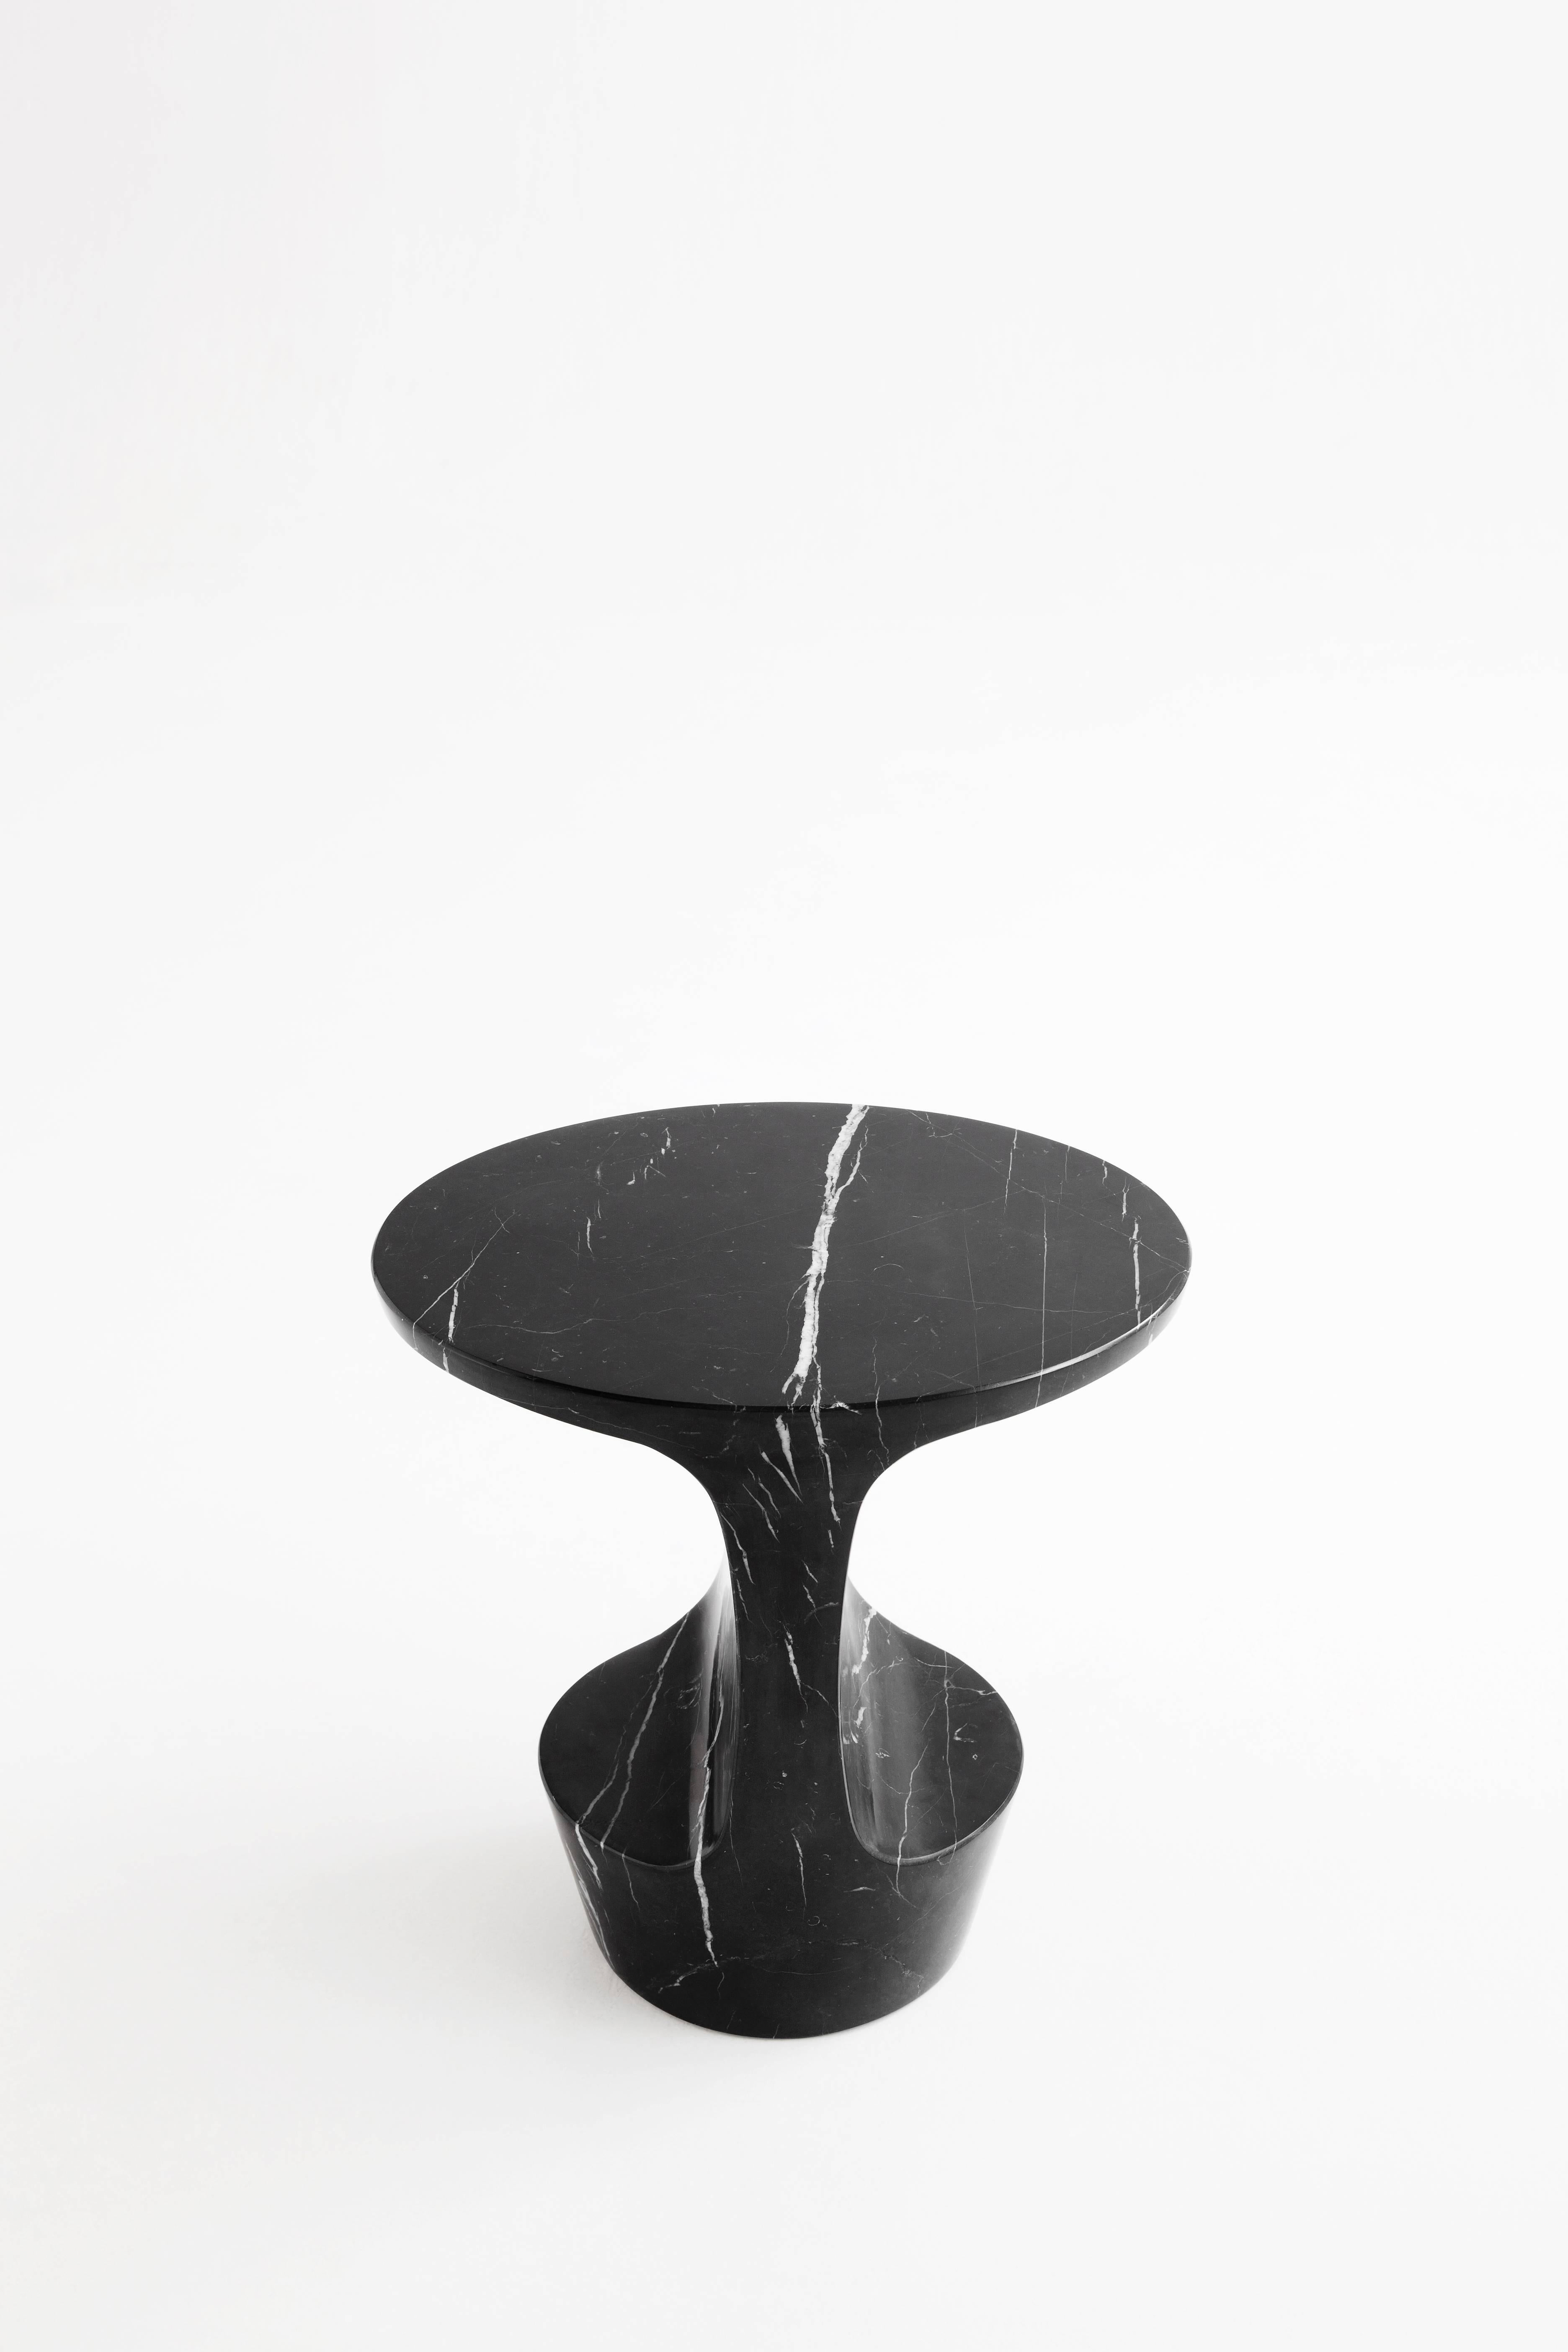 Atlas is a side table made out of a Marquina marble block, extracted in the North of Spain. The piece takes its name after the young titan of the Greek mythology that was fated to sustain the pillars that separated the Earth from Heaven and its